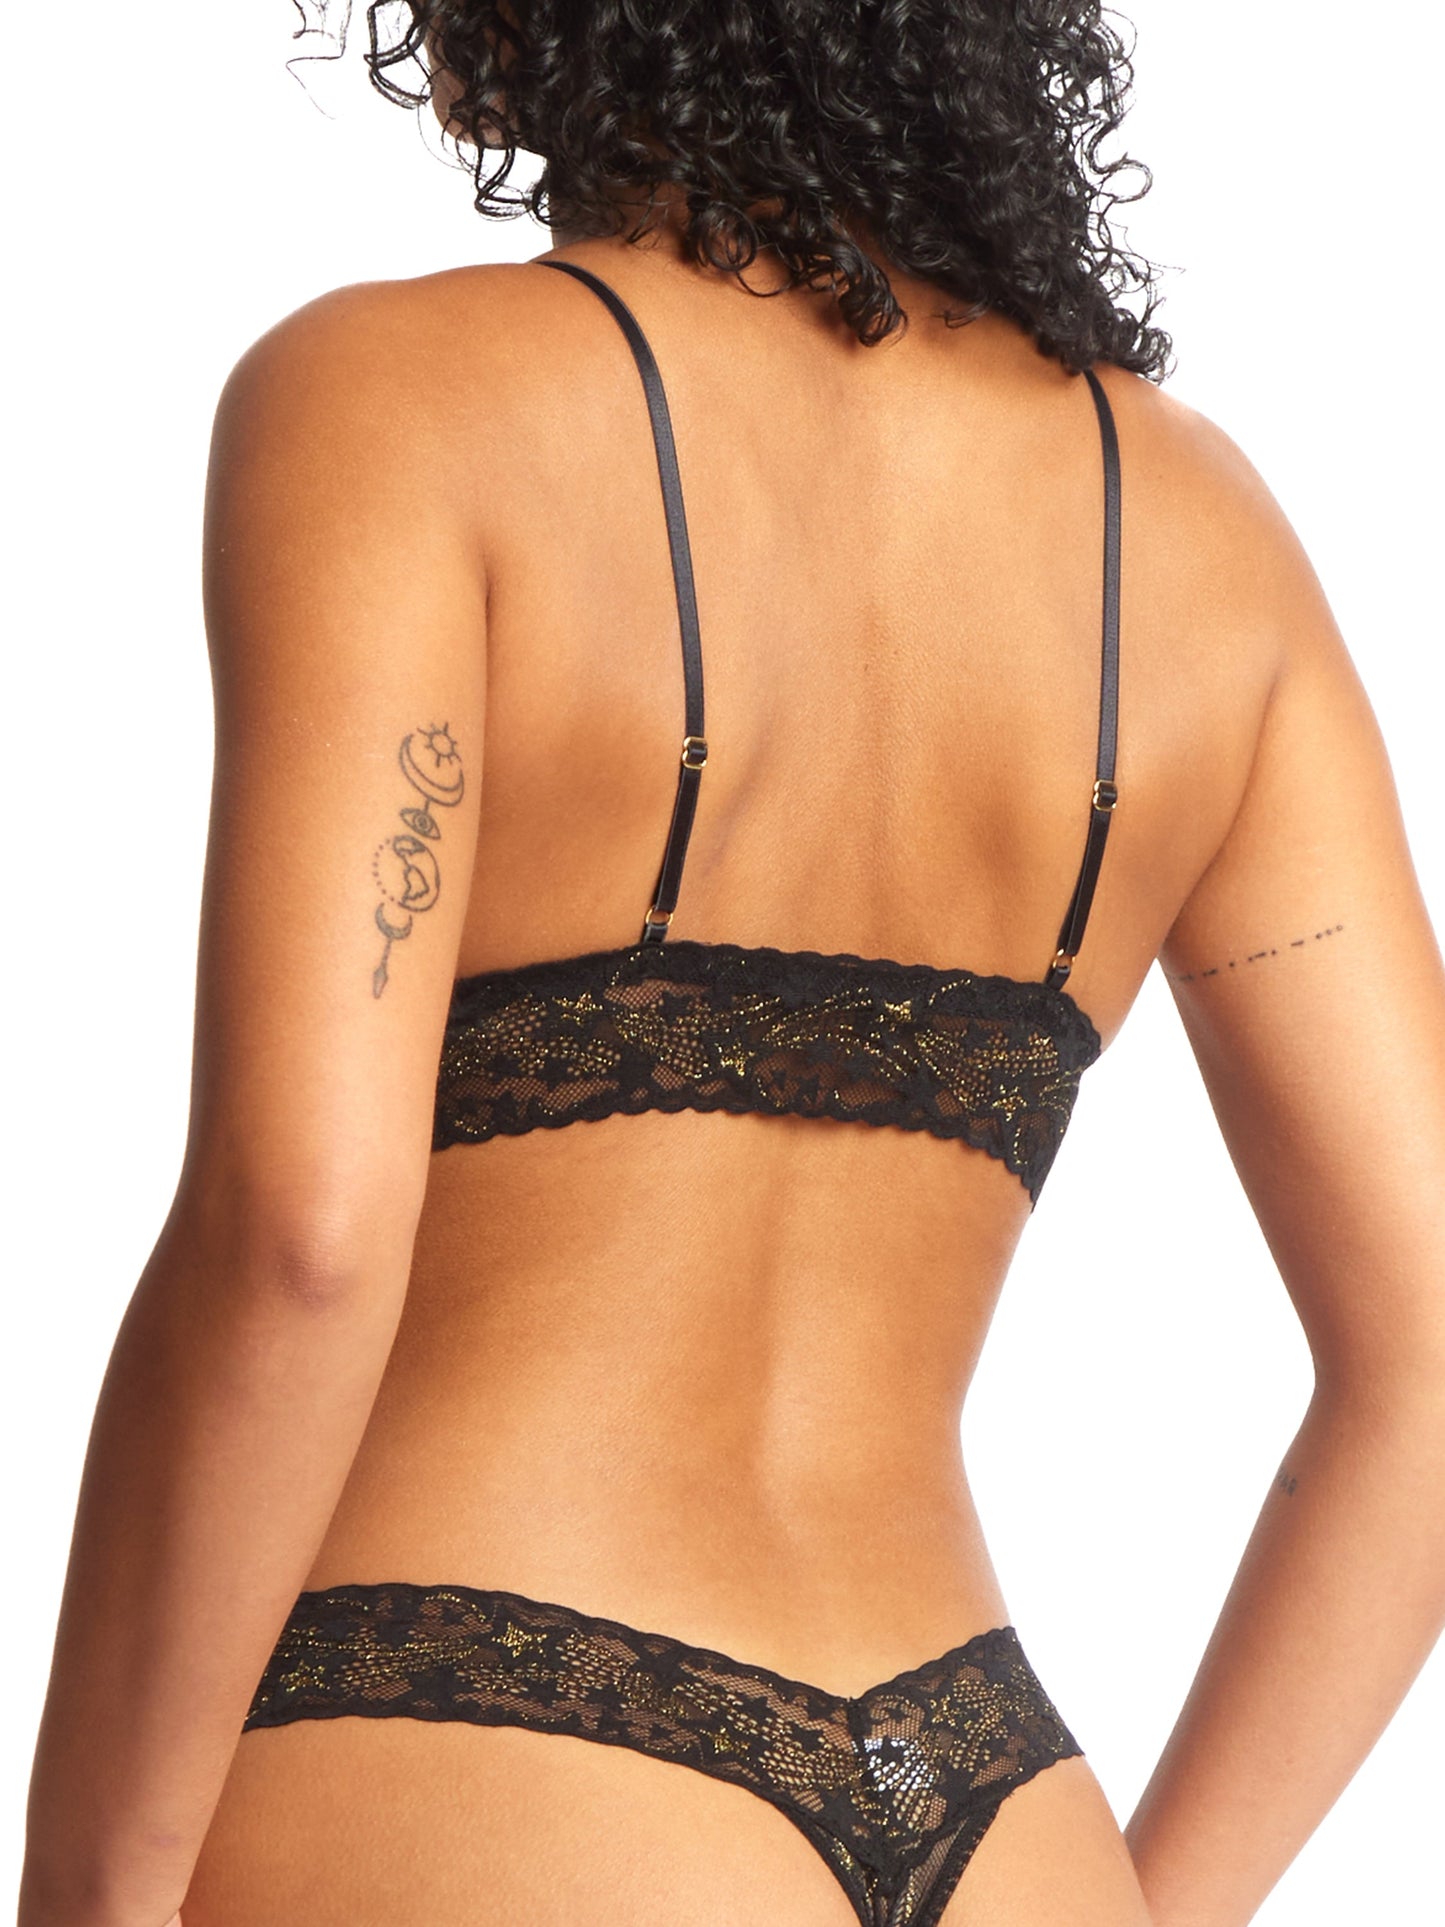 Night Fever Triangle Bralette worn by model back view